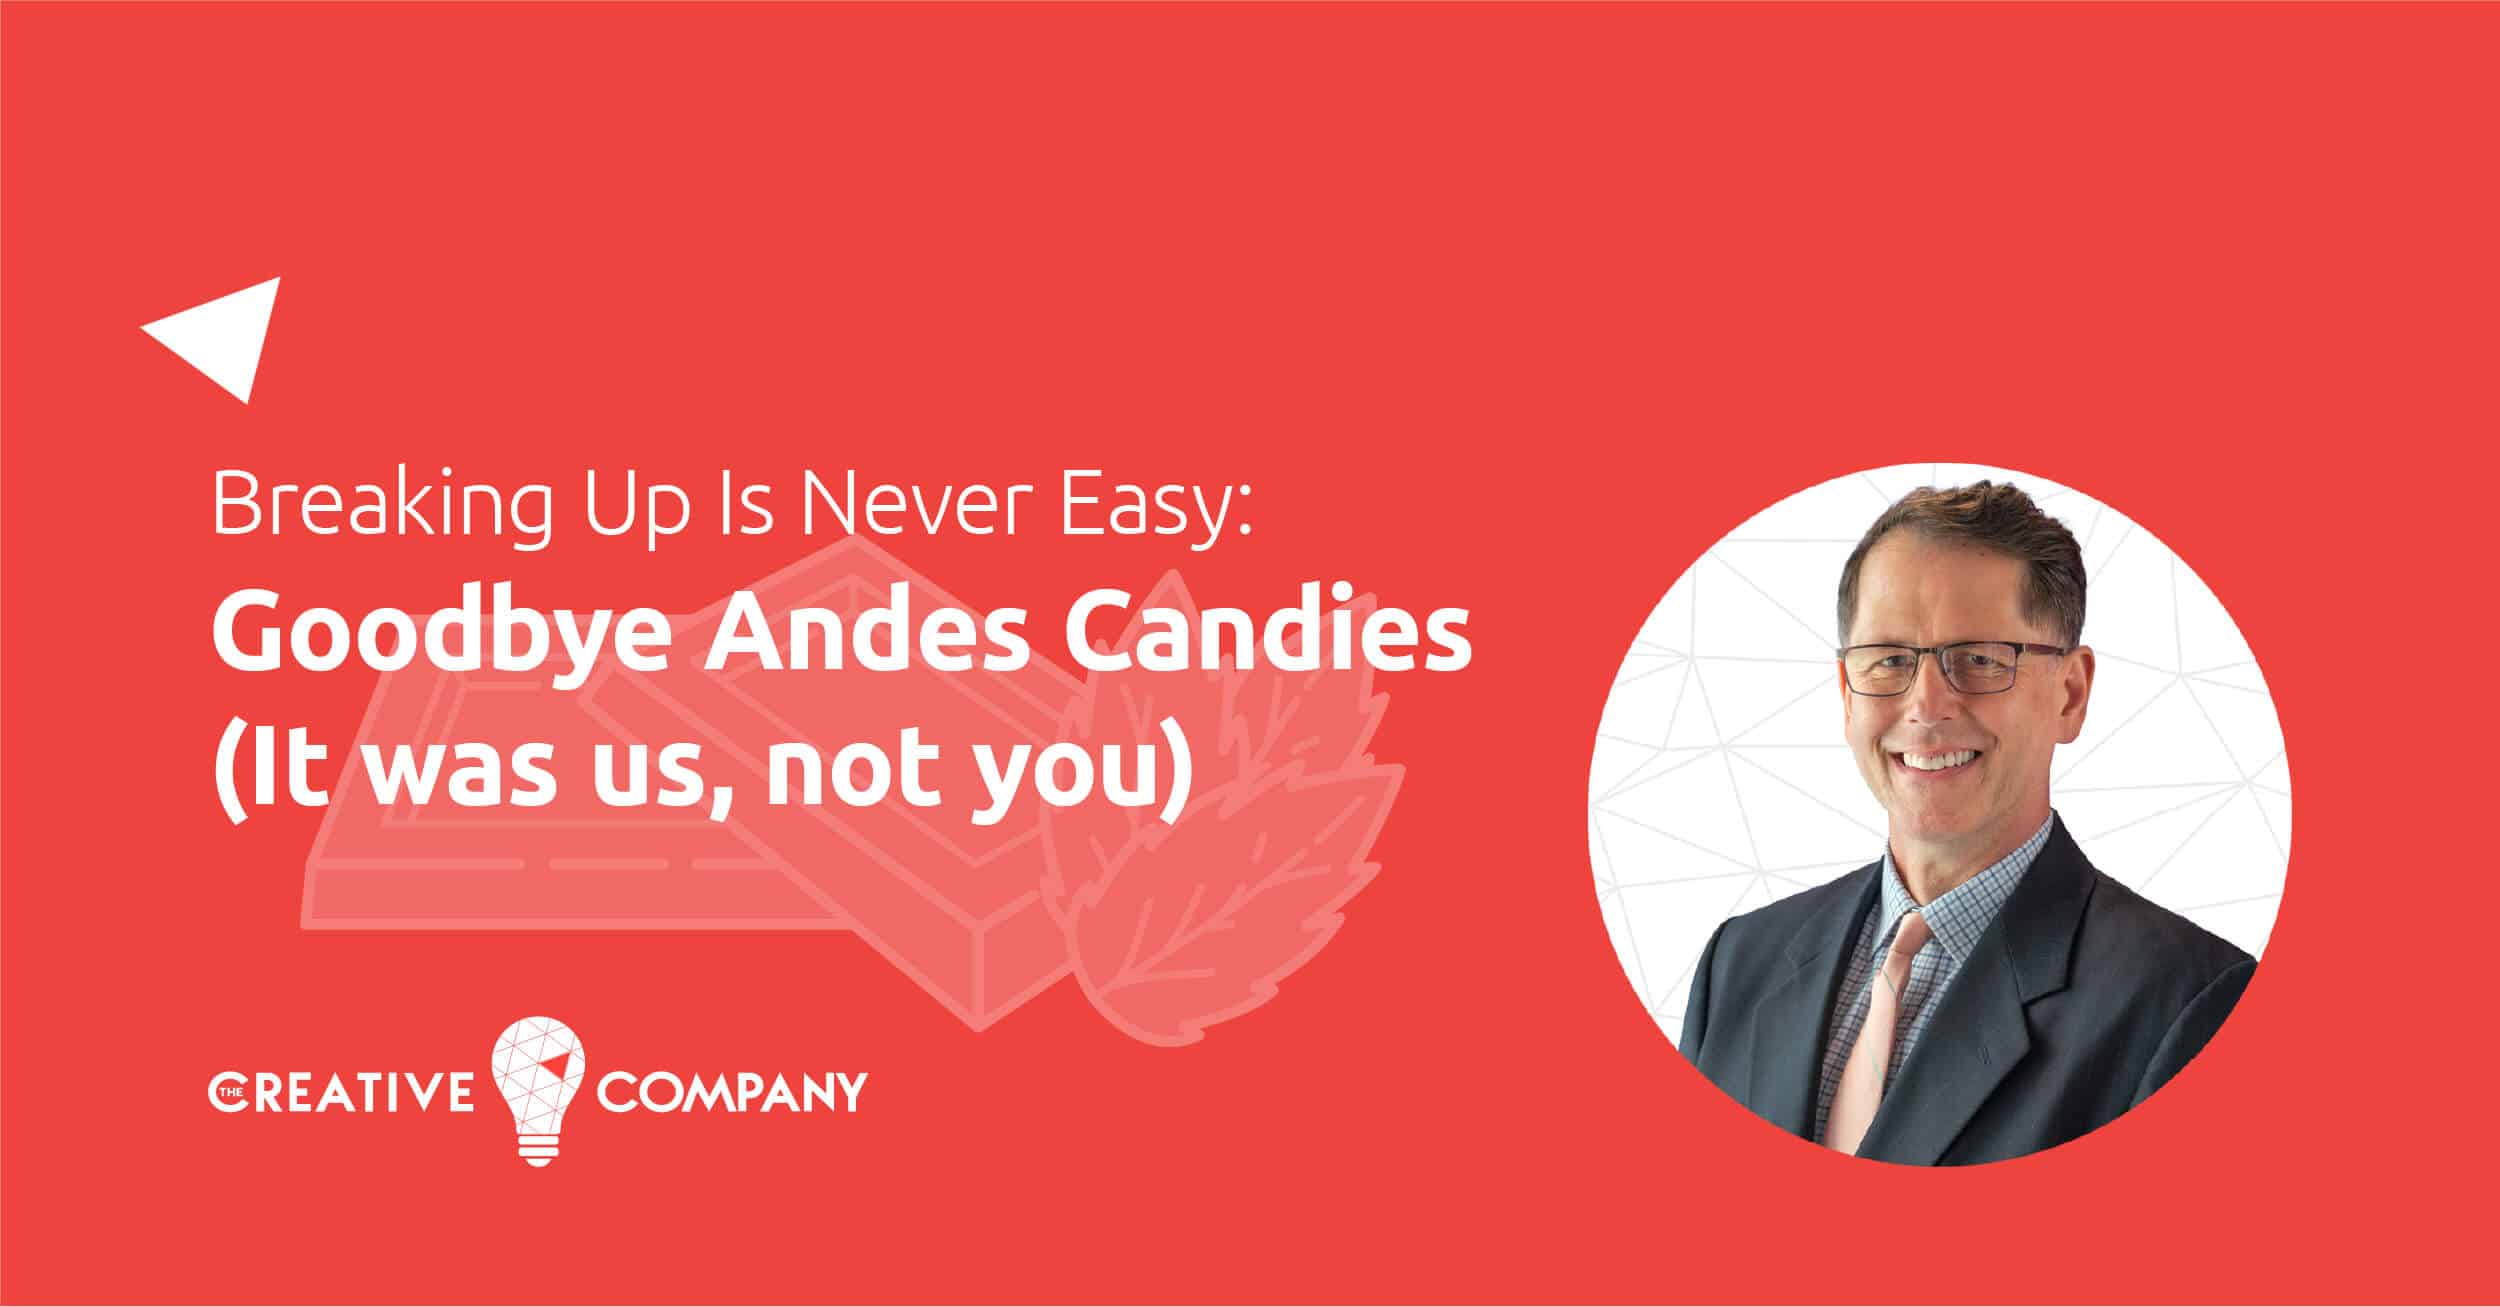 Breaking Up Is Never Easy: Goodbye Andes Candies (It was us, not you.) graphic with Author, Craig Hadley's professional Headshot photo.